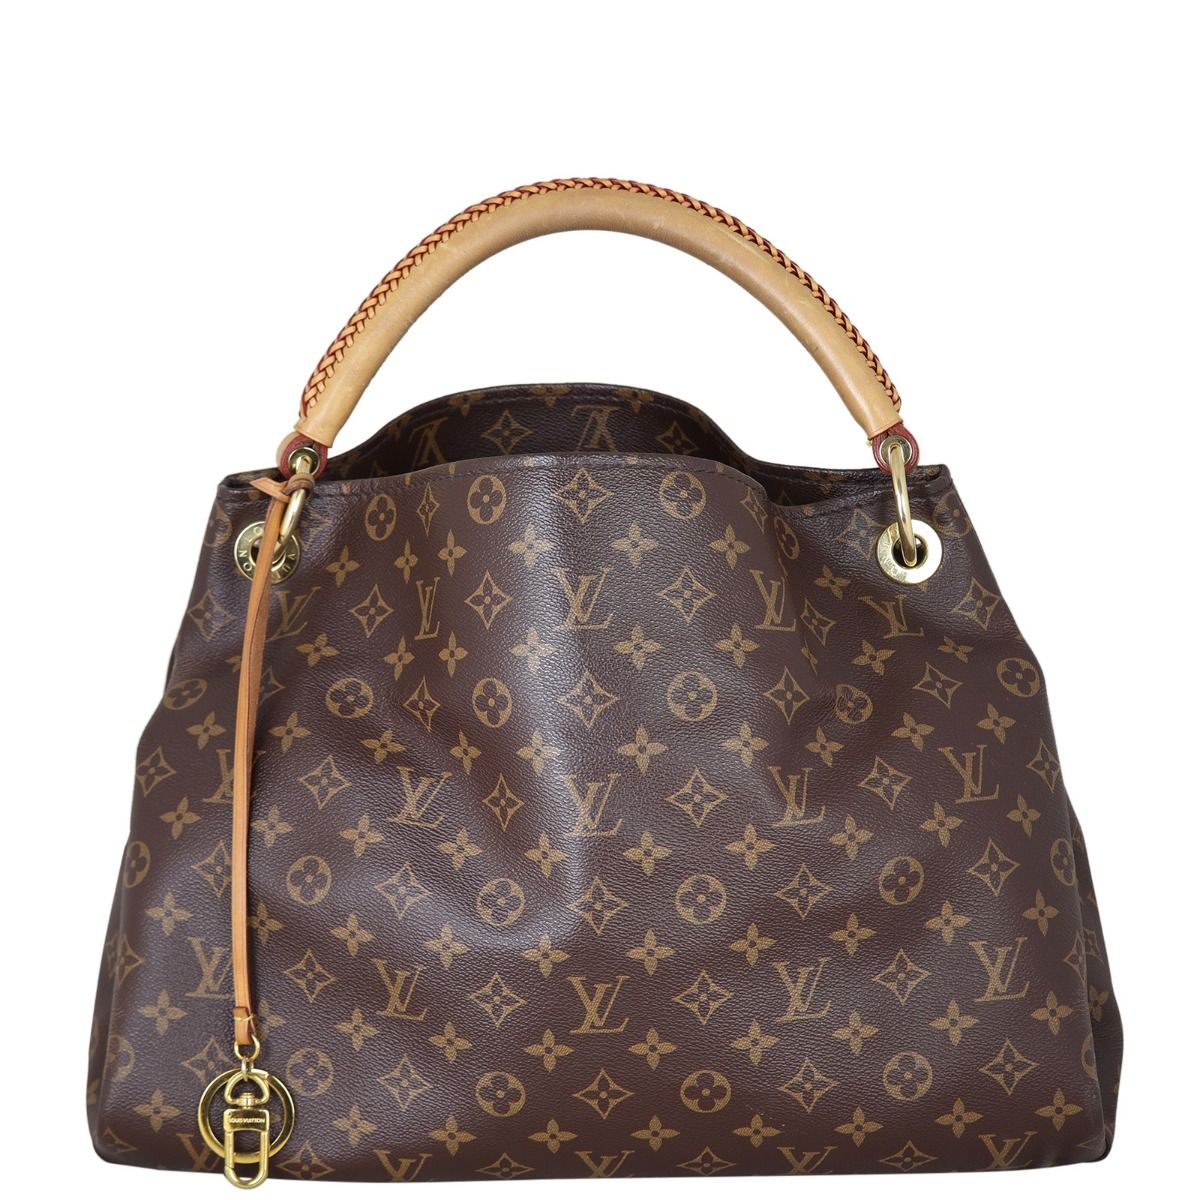 Review of the Redesigned Louis Vuitton Artsy MM 